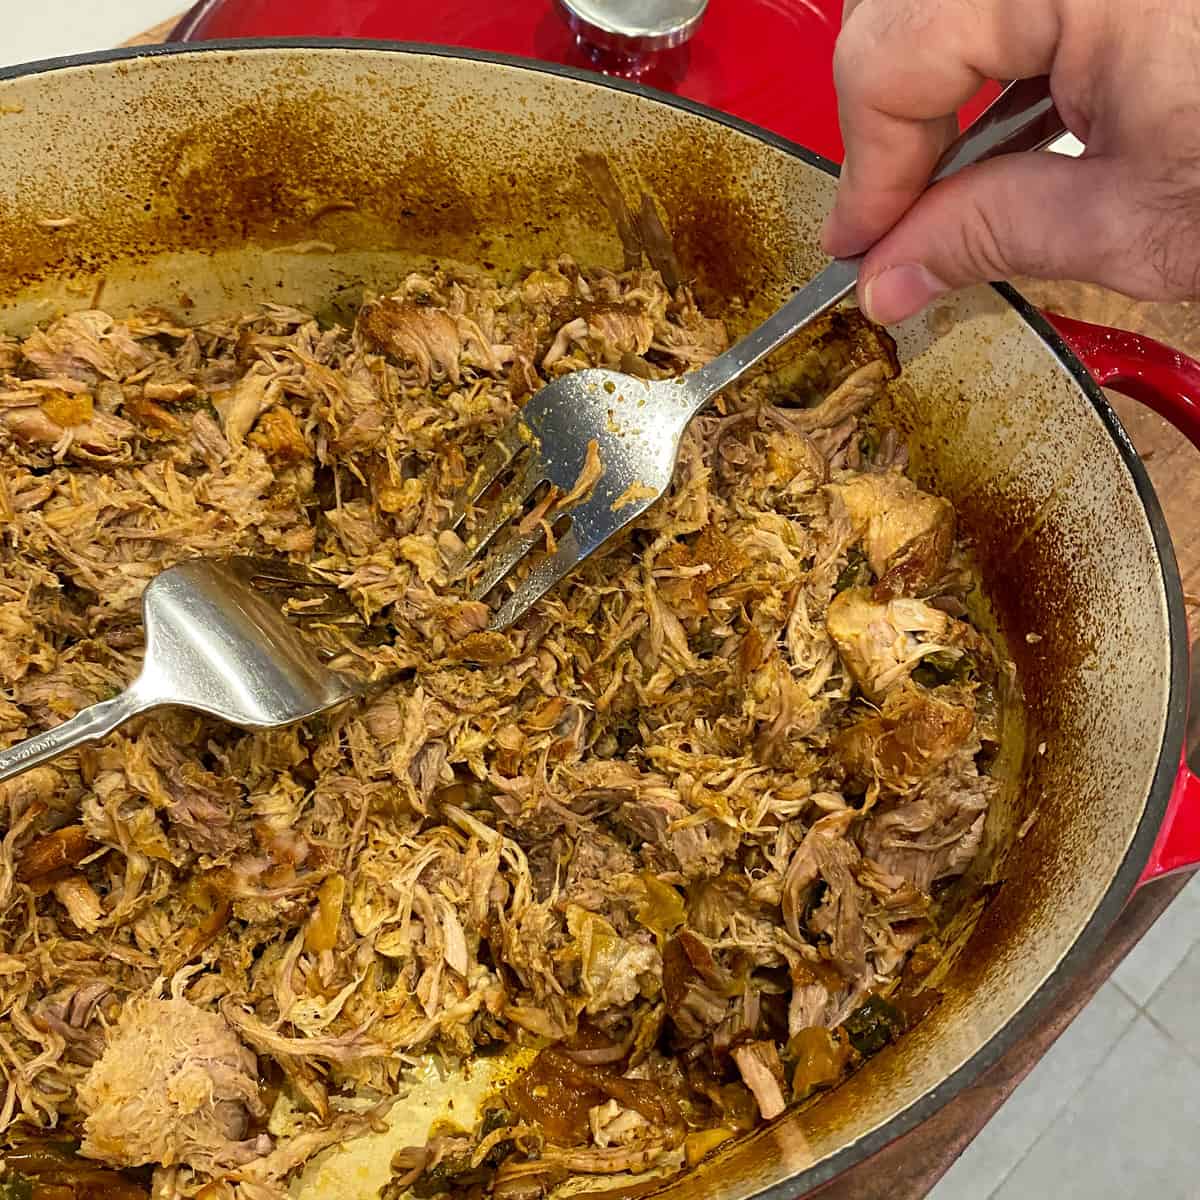 Using two forks to shred the cooked pork meat.